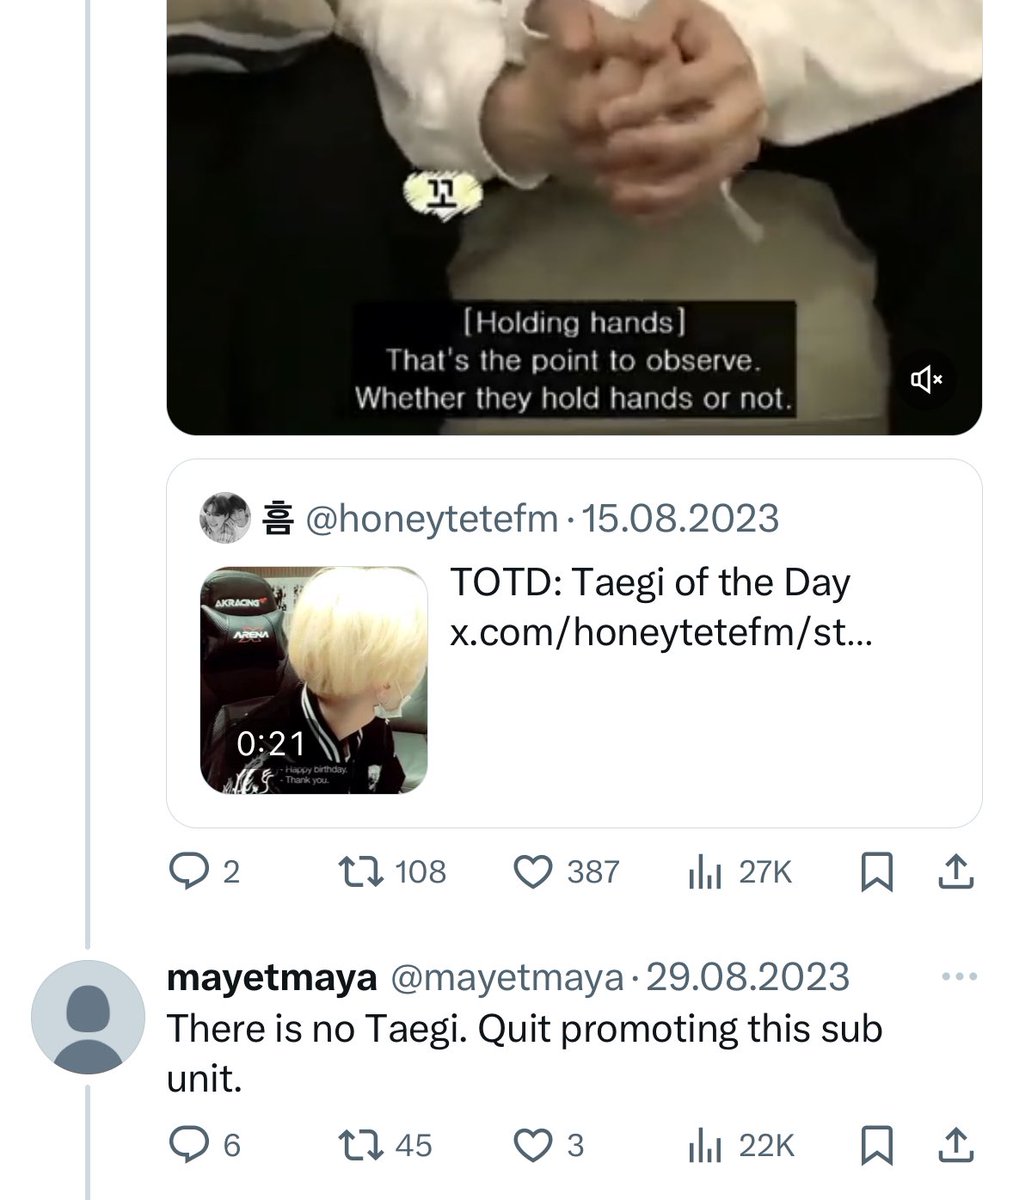 remember “there is no taegi” ?😭